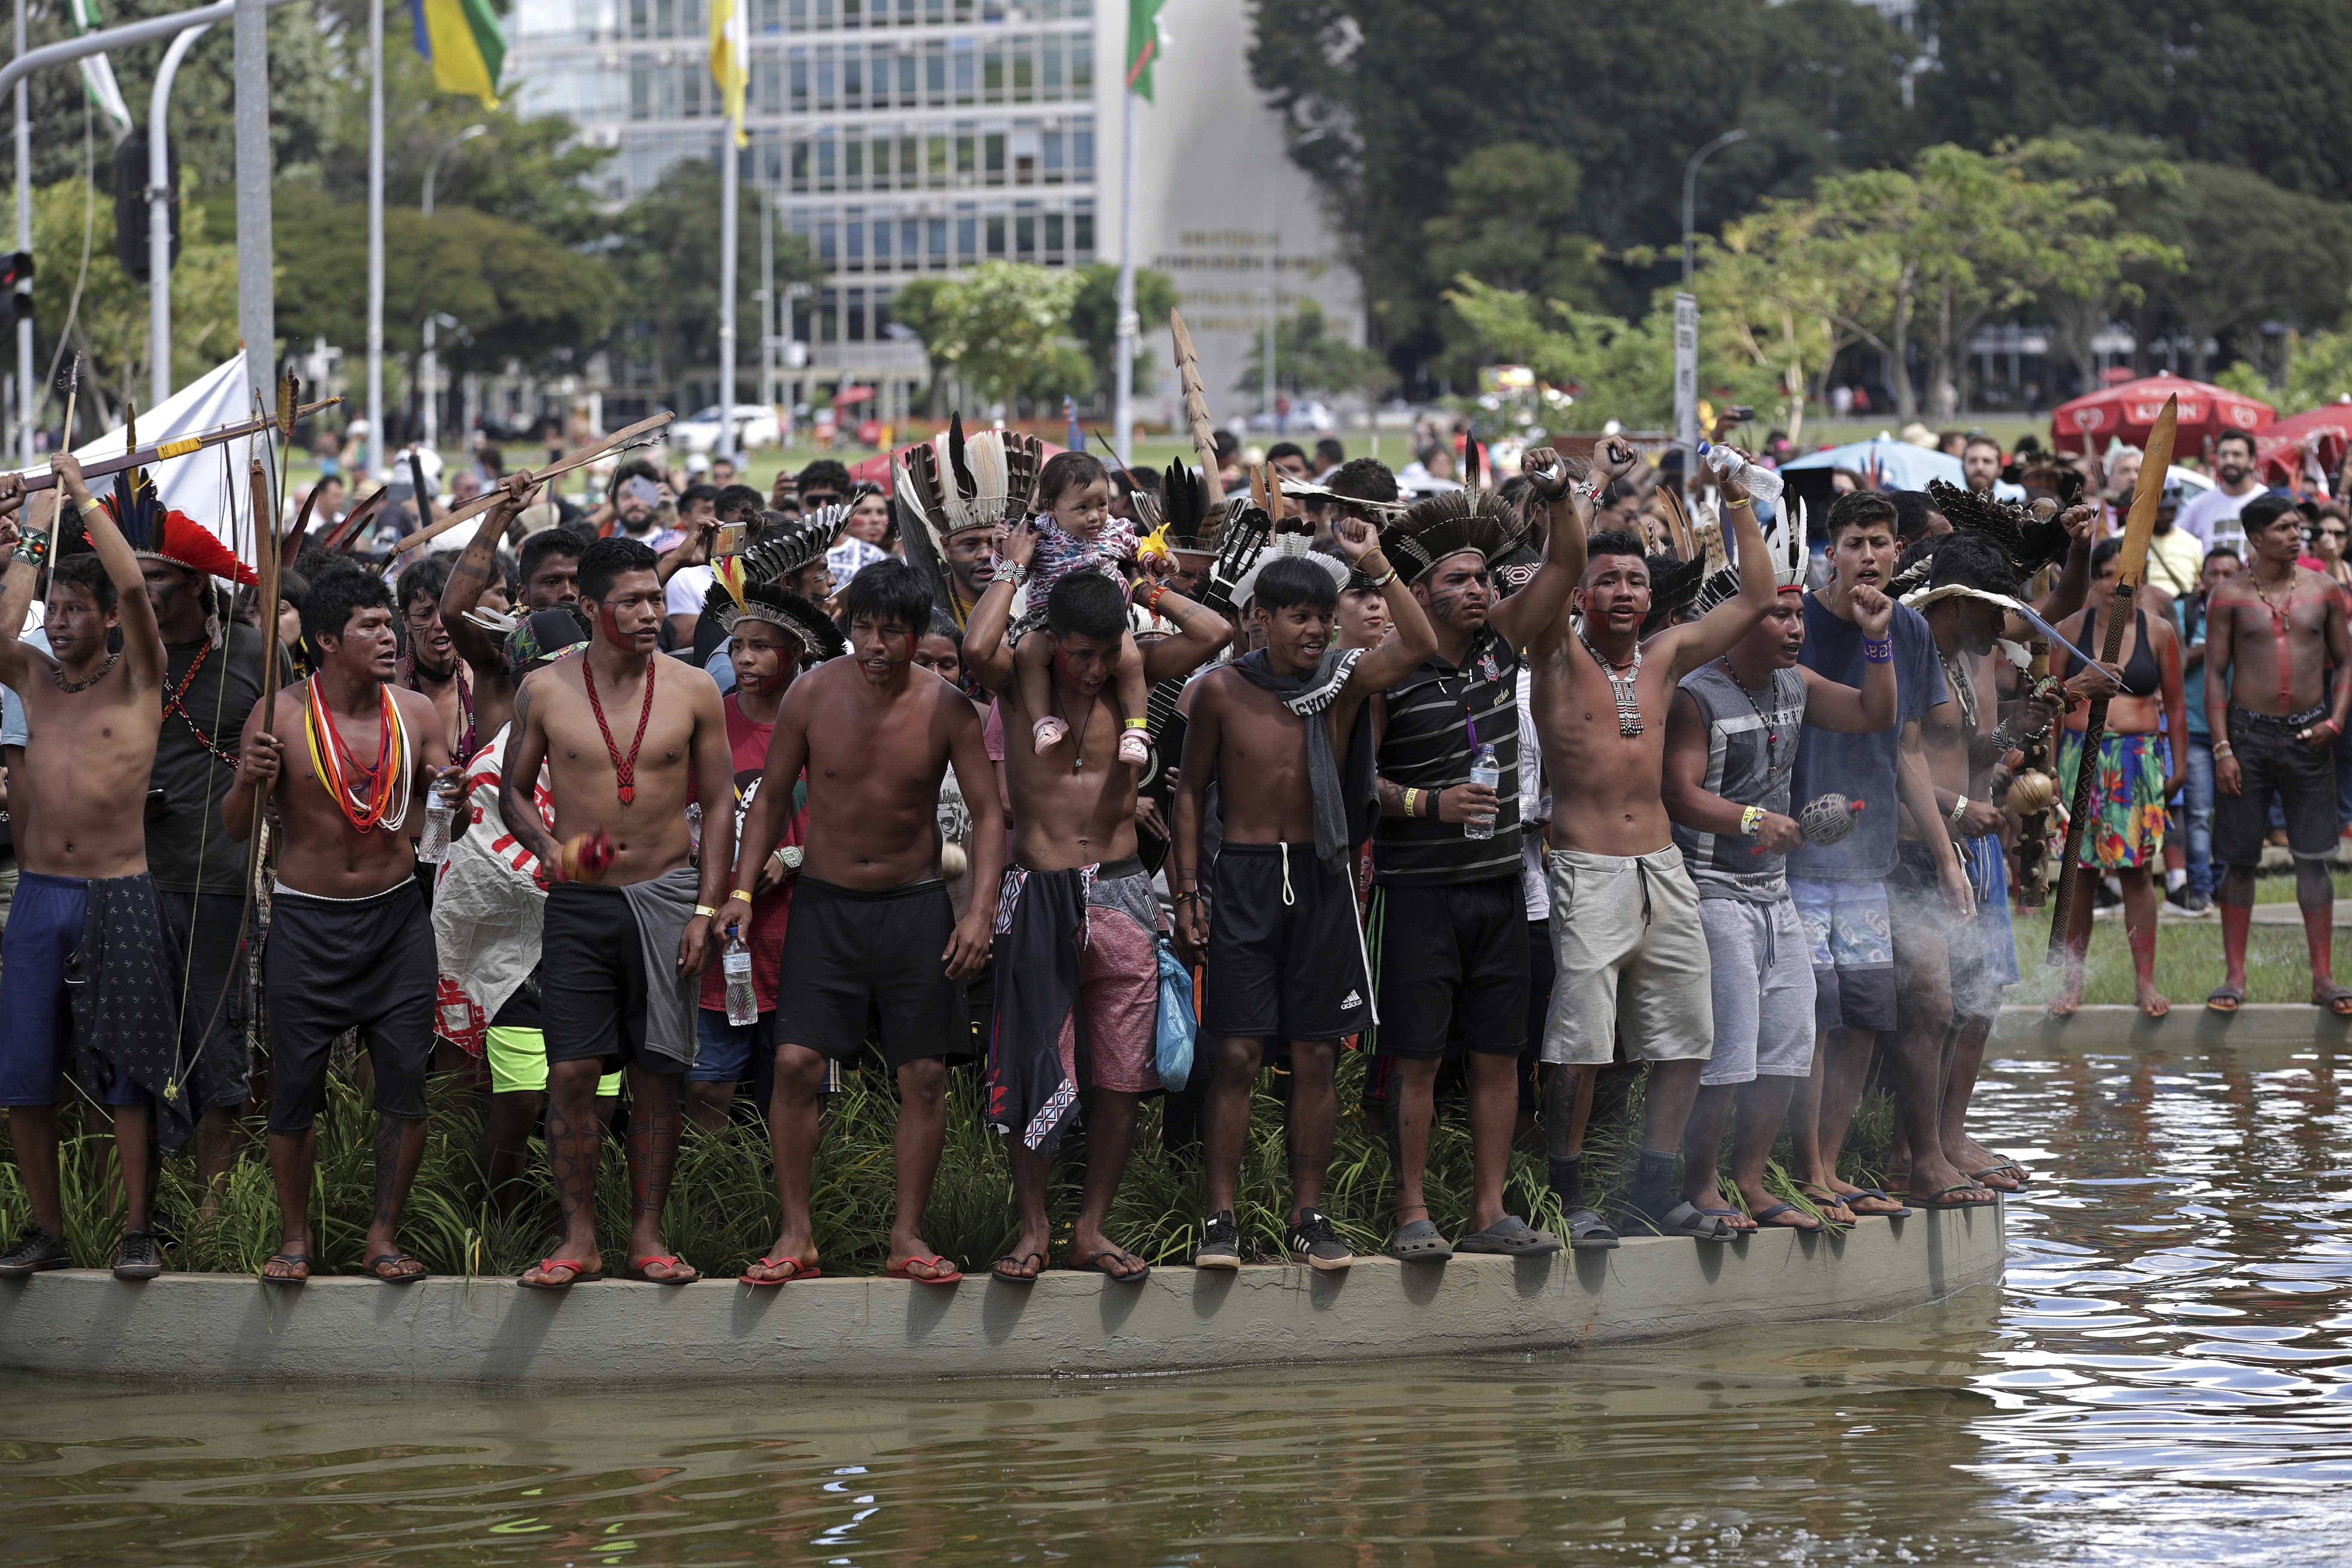 Indigenous men demonstrate in front of the headquarters of the Ministry of Justice, during the big march of the annual three-day campout known as The Free Land Encampment, to protest what they see as rollbacks of indigenous rights under President Jair Bolsonaro, in Brasilia, Brazil, Friday, April 26, 2019. Before becoming president, Bolsonaro promised that if he were elected, 